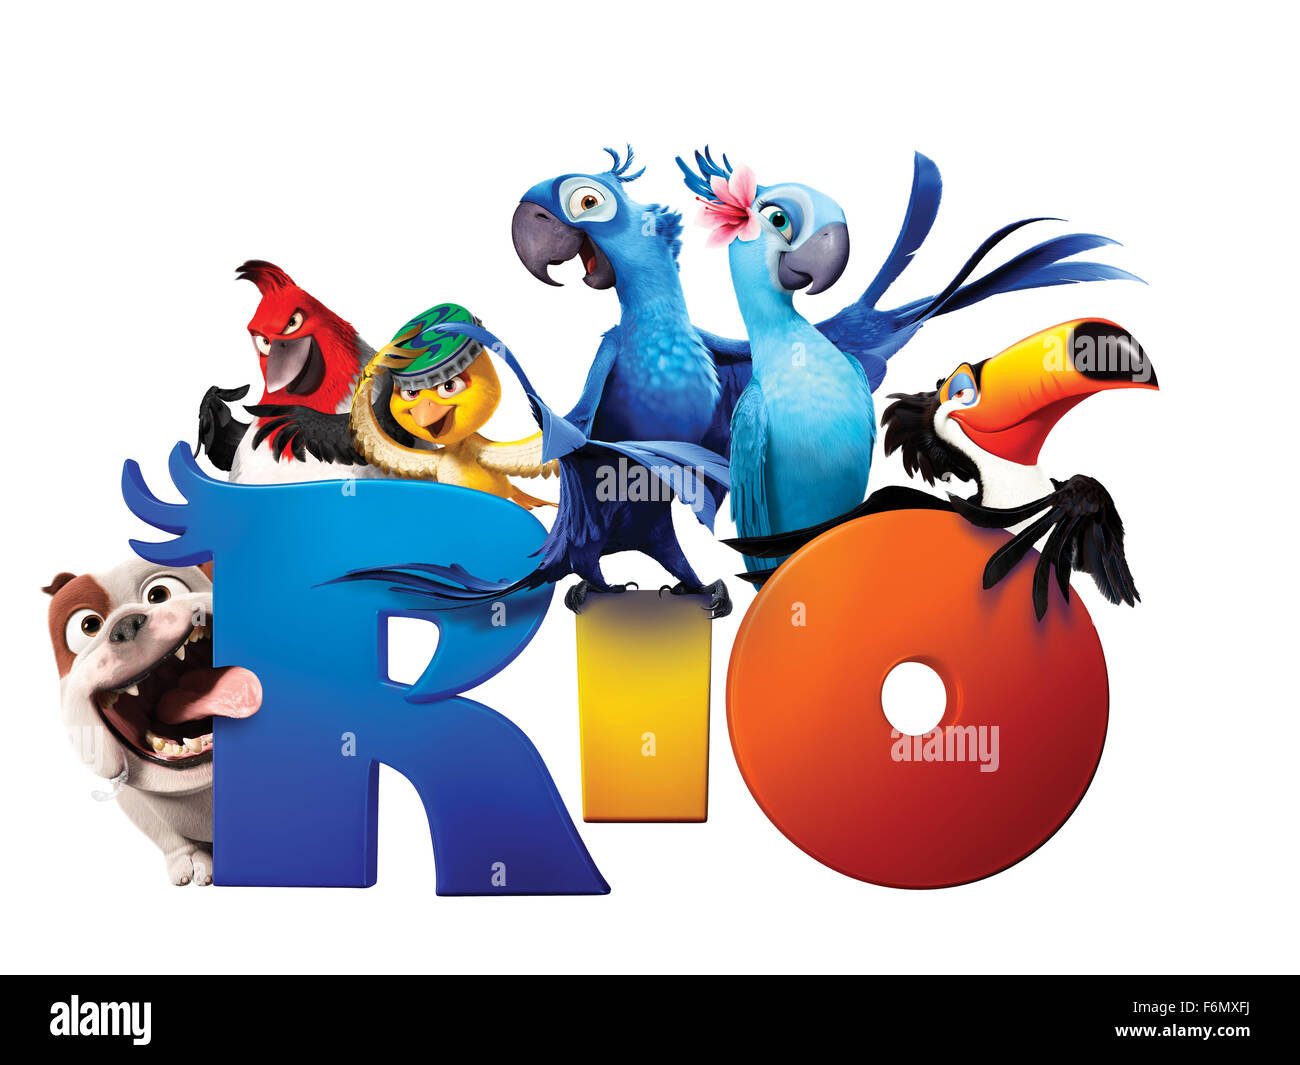 RELEASE DATE: April 12, 2011 MOVIE TITLE: Rio STUDIO: Twentieth Century Fox  Animation DIRECTOR: Carlos Saldanha PLOT: When Blu, a domesticated macaw  from small-town Minnesota, meets the fiercely independent Jewel, he takes